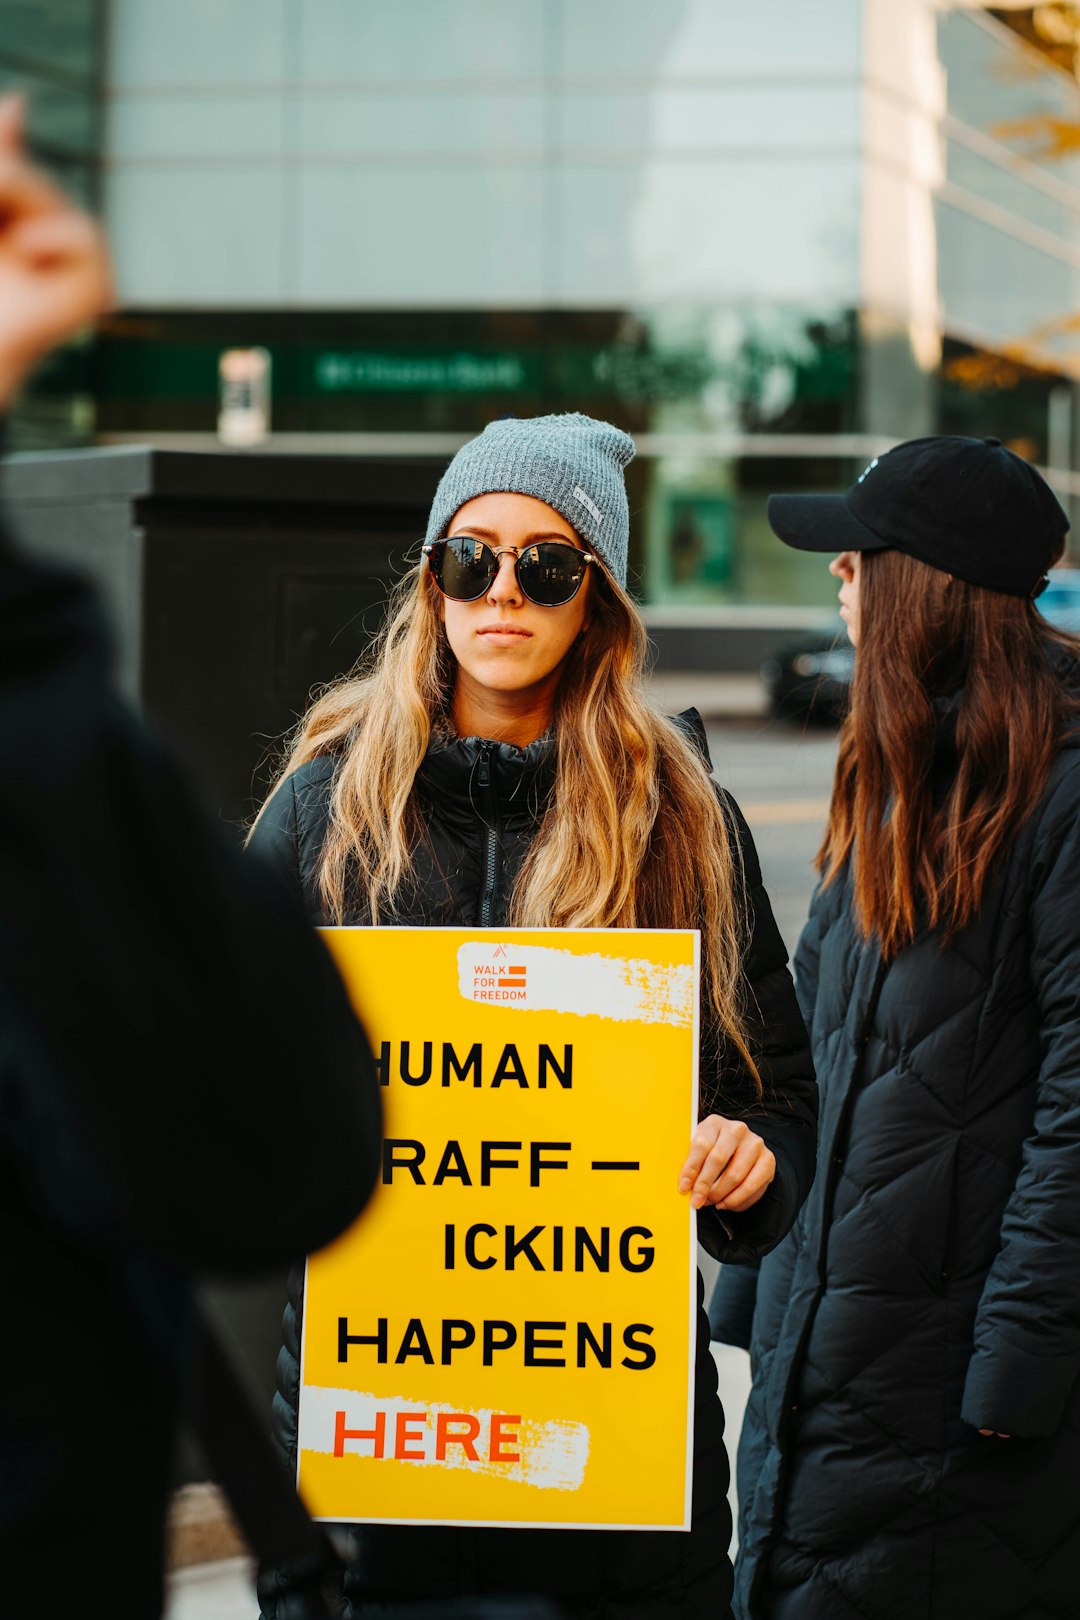 woman in black jacket wearing black sunglasses holding yellow and black signage